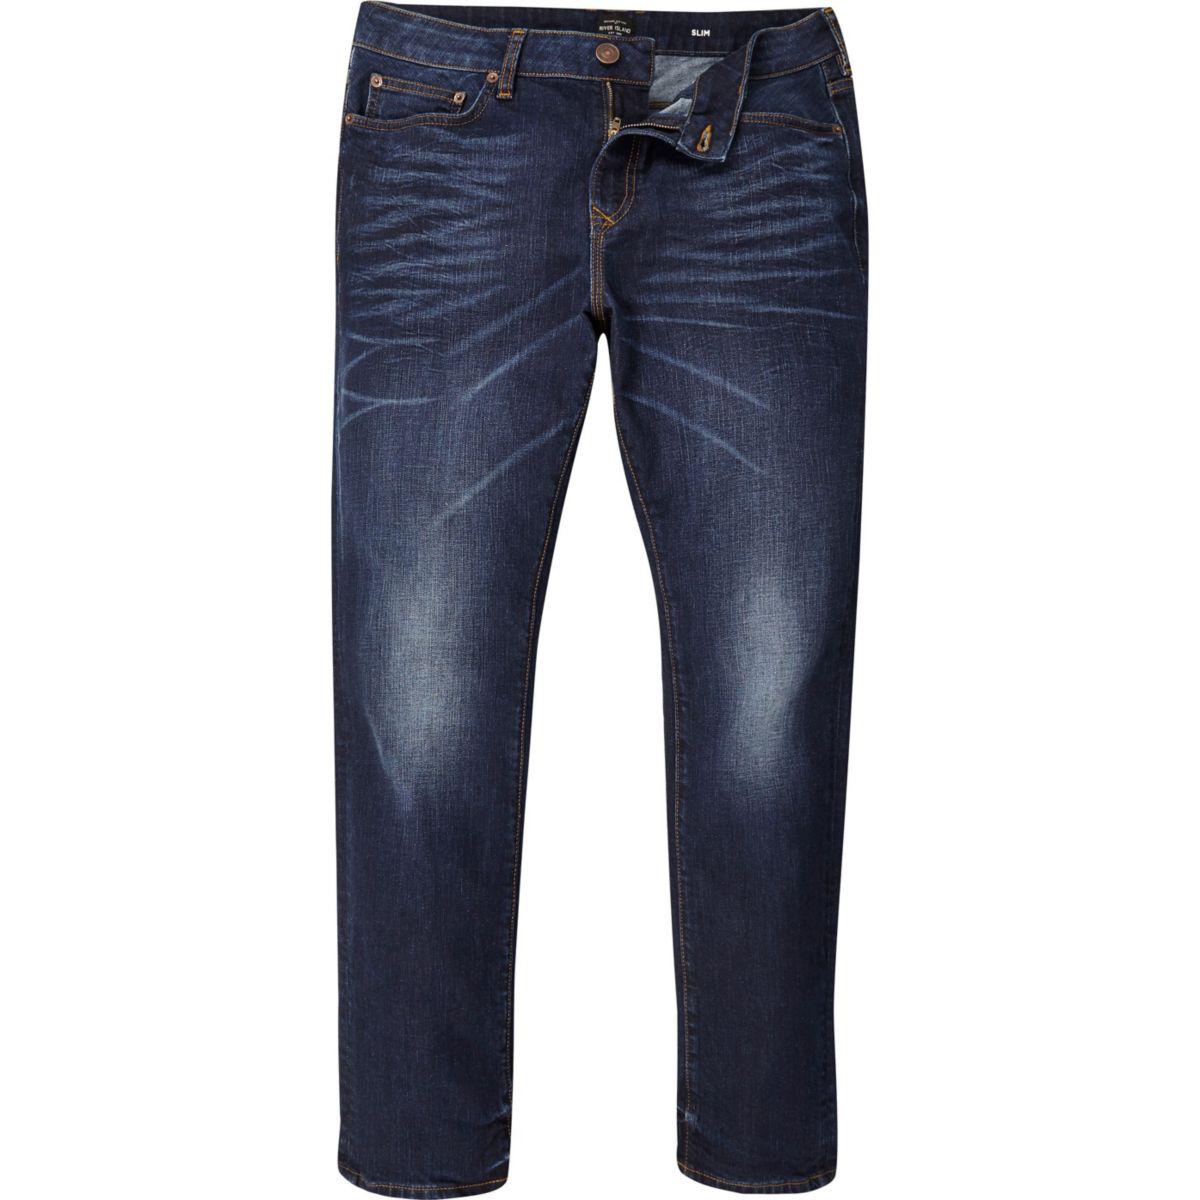 Lyst - River island Big And Tall Dark Blue Dylan Slim Fit Jeans in Blue ...